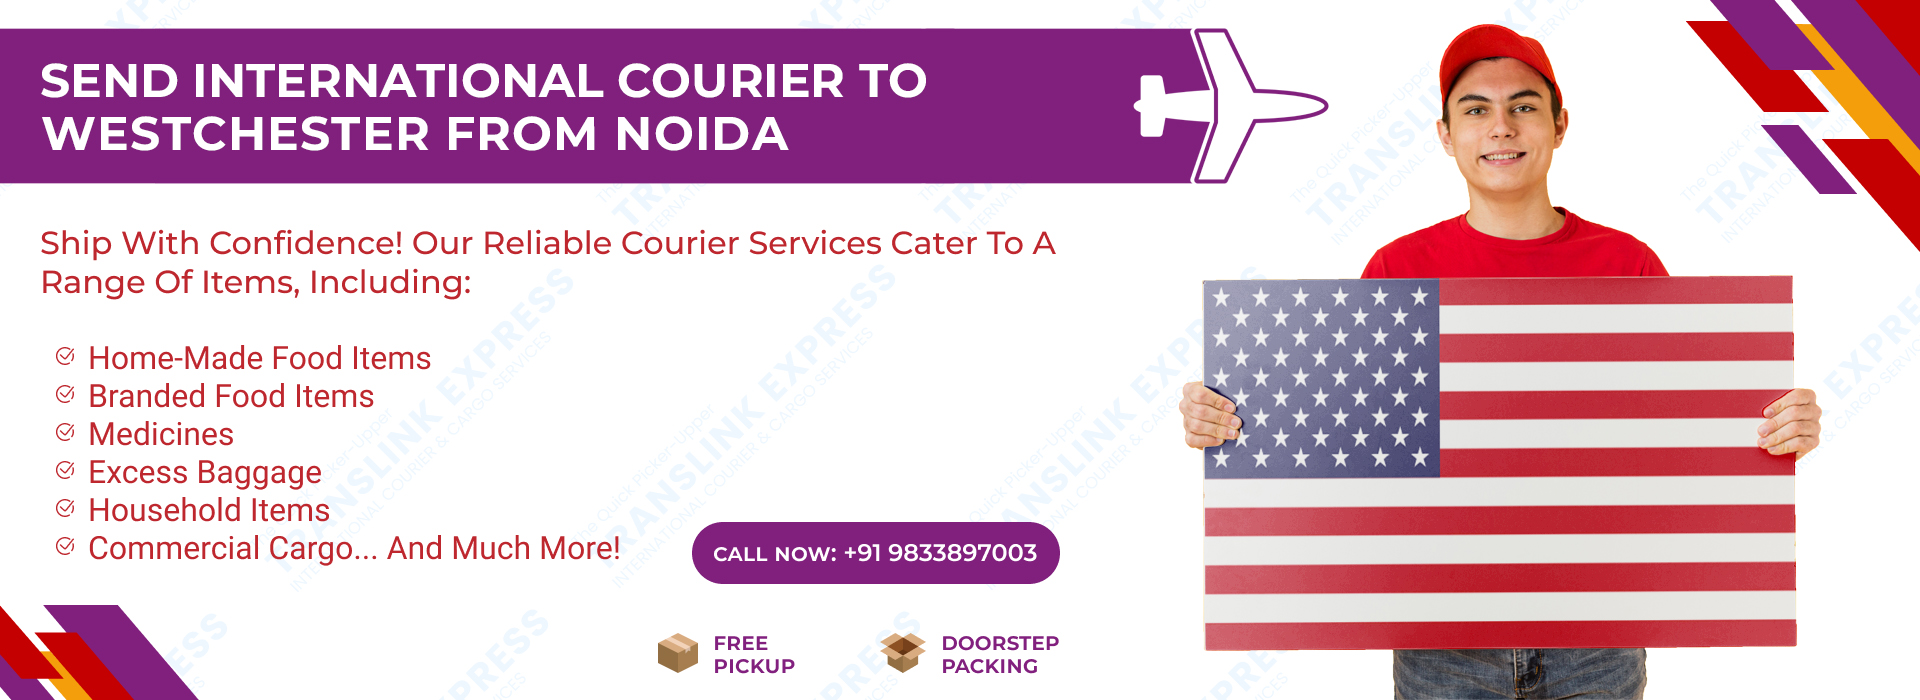 Courier to Westchester From Noida